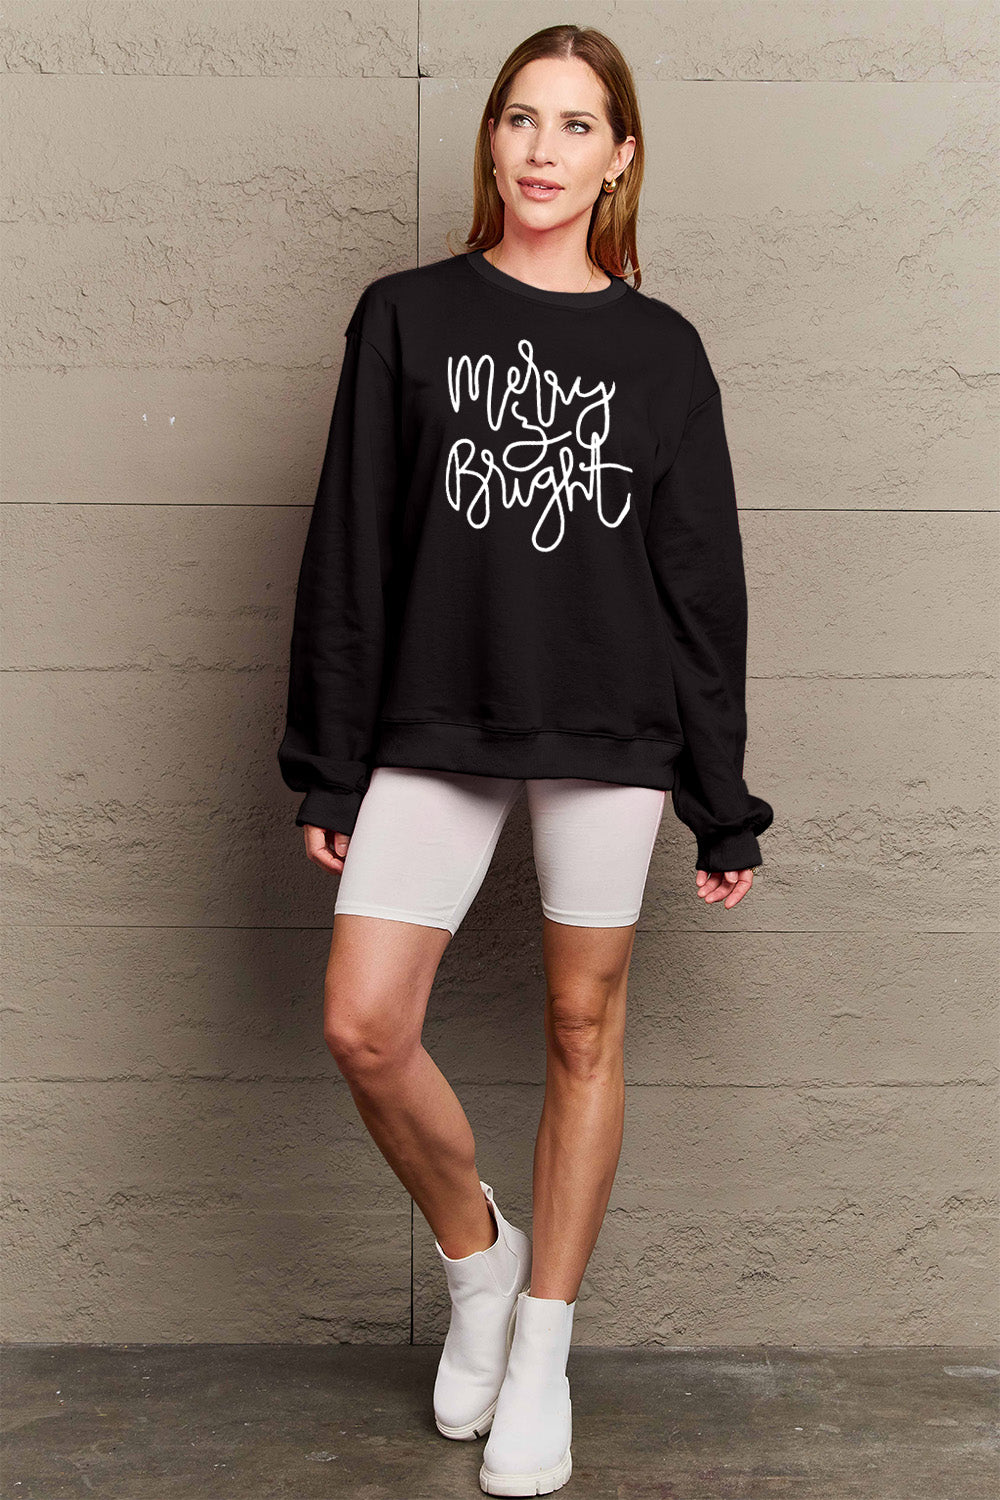 MERRY AND BRIGHT Graphic Sweatshirt - 3 Colors